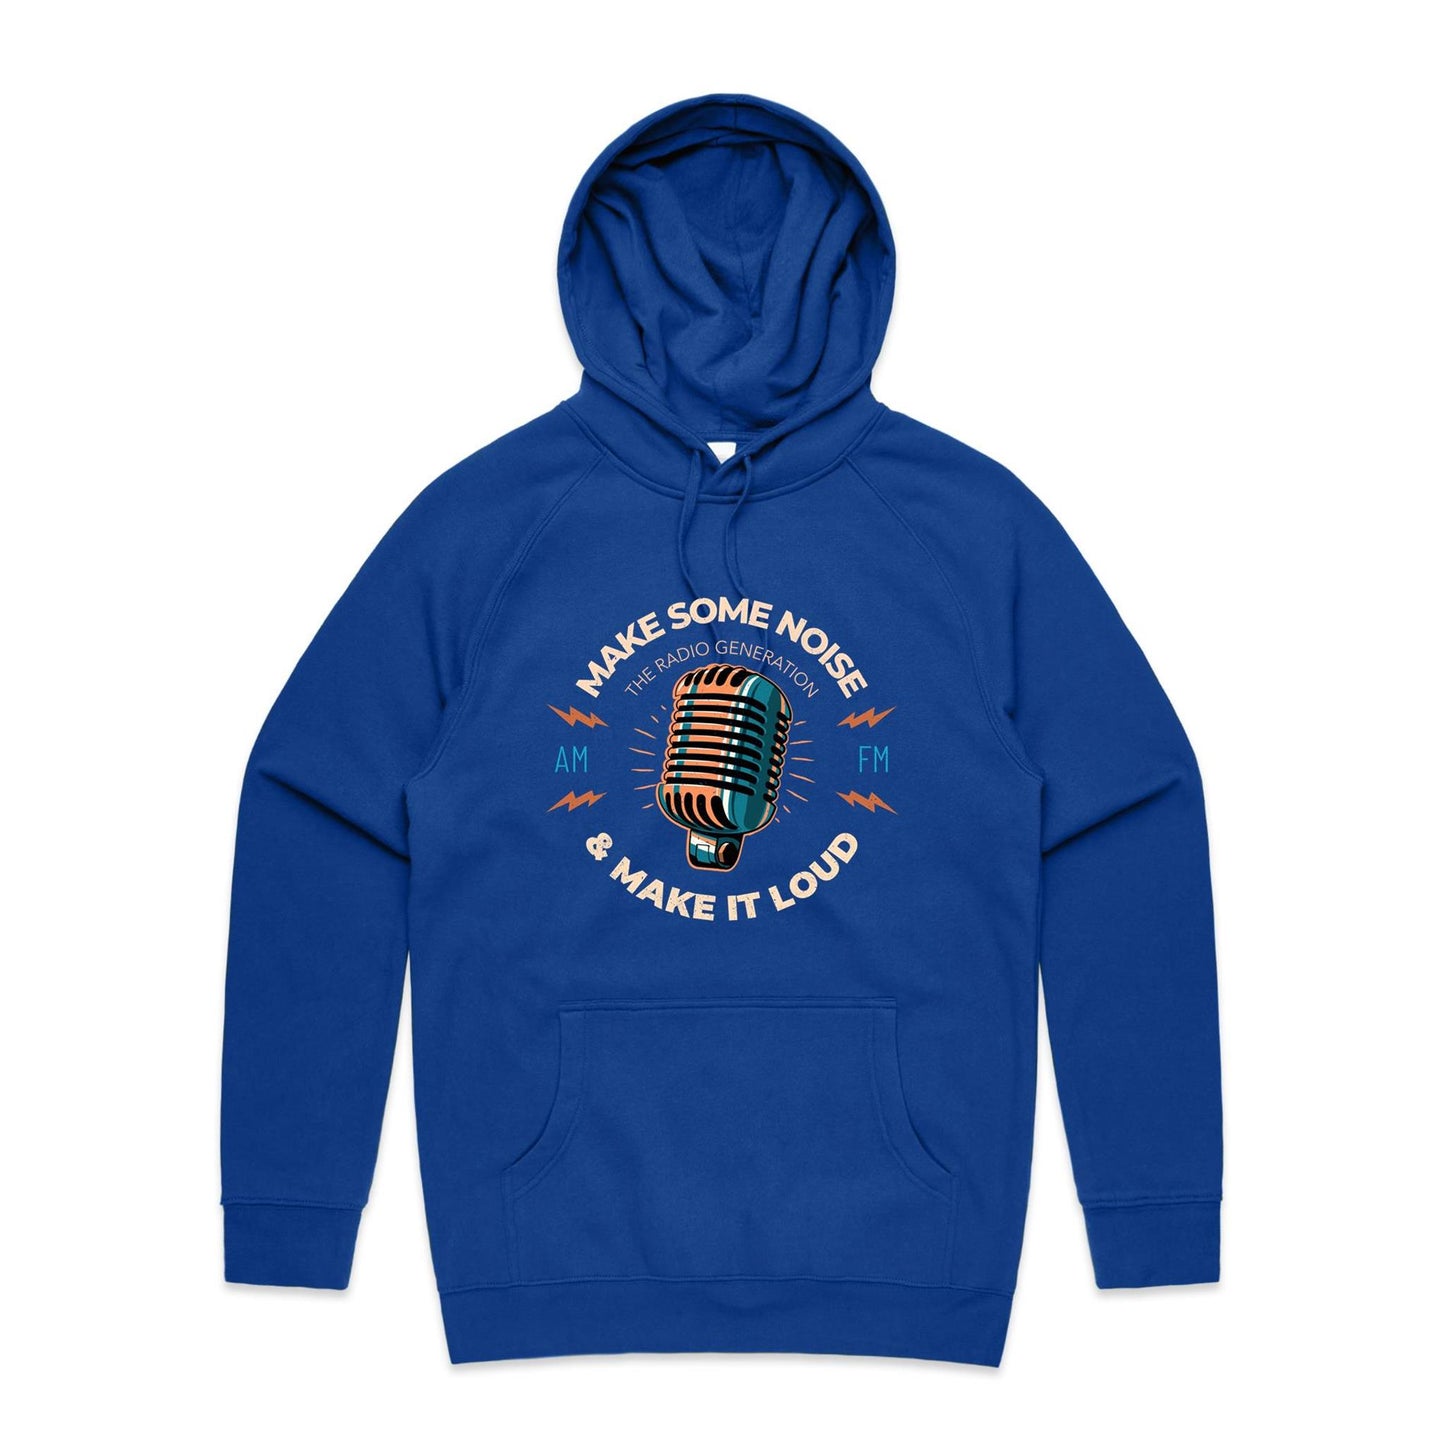 Make Some Noise And Make It Loud - Supply Hood Bright Royal Mens Supply Hoodie Music